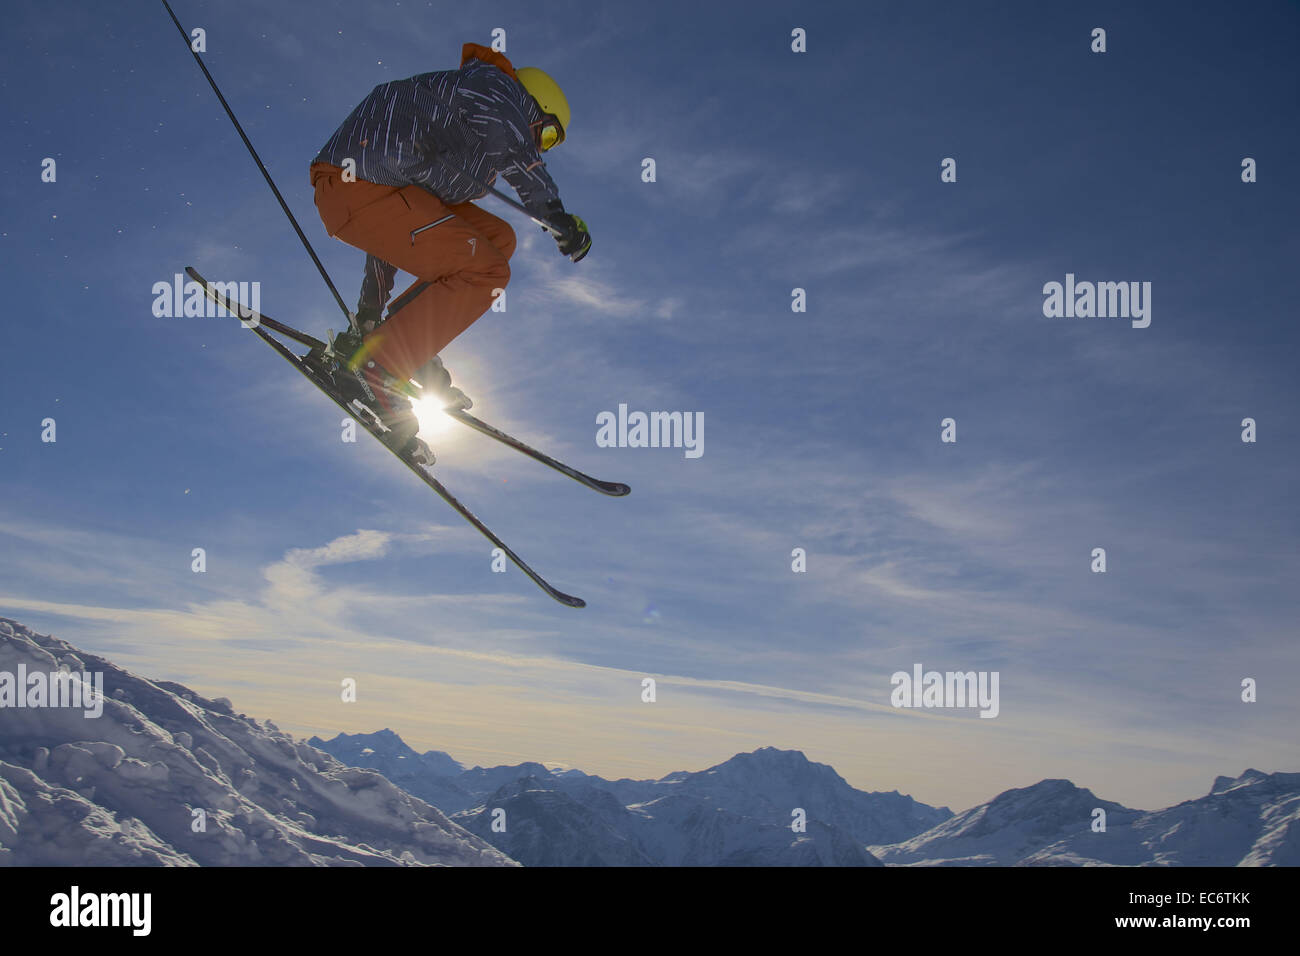 jumping freeskier in the mountains, silhouetted Stock Photo